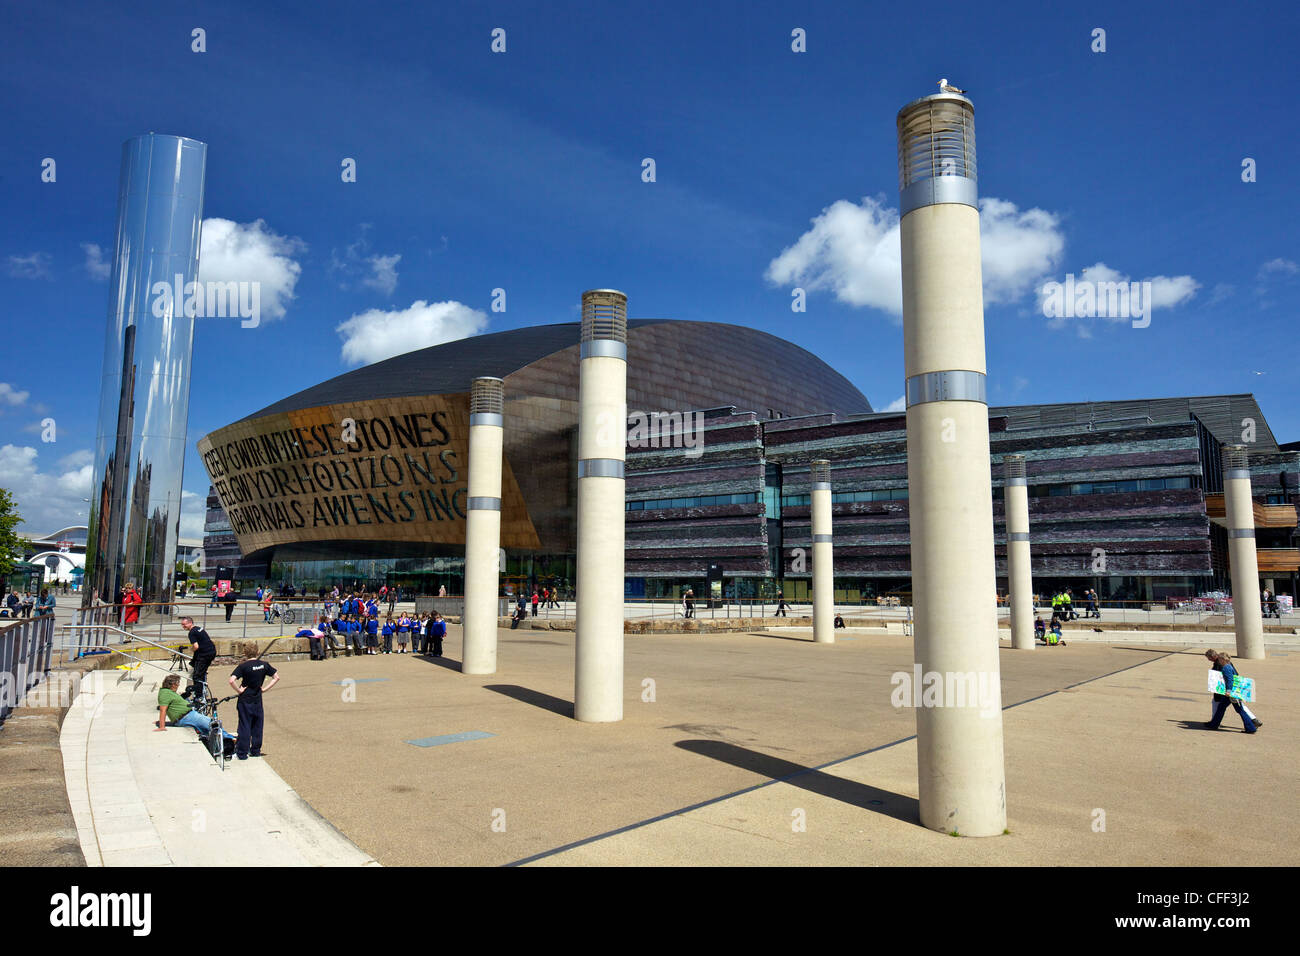 Wales Millennium Centre, Bute Place, Cardiff Bay, Cardiff, South Glamorgan, South Wales, United Kingdom, Europe Stock Photo